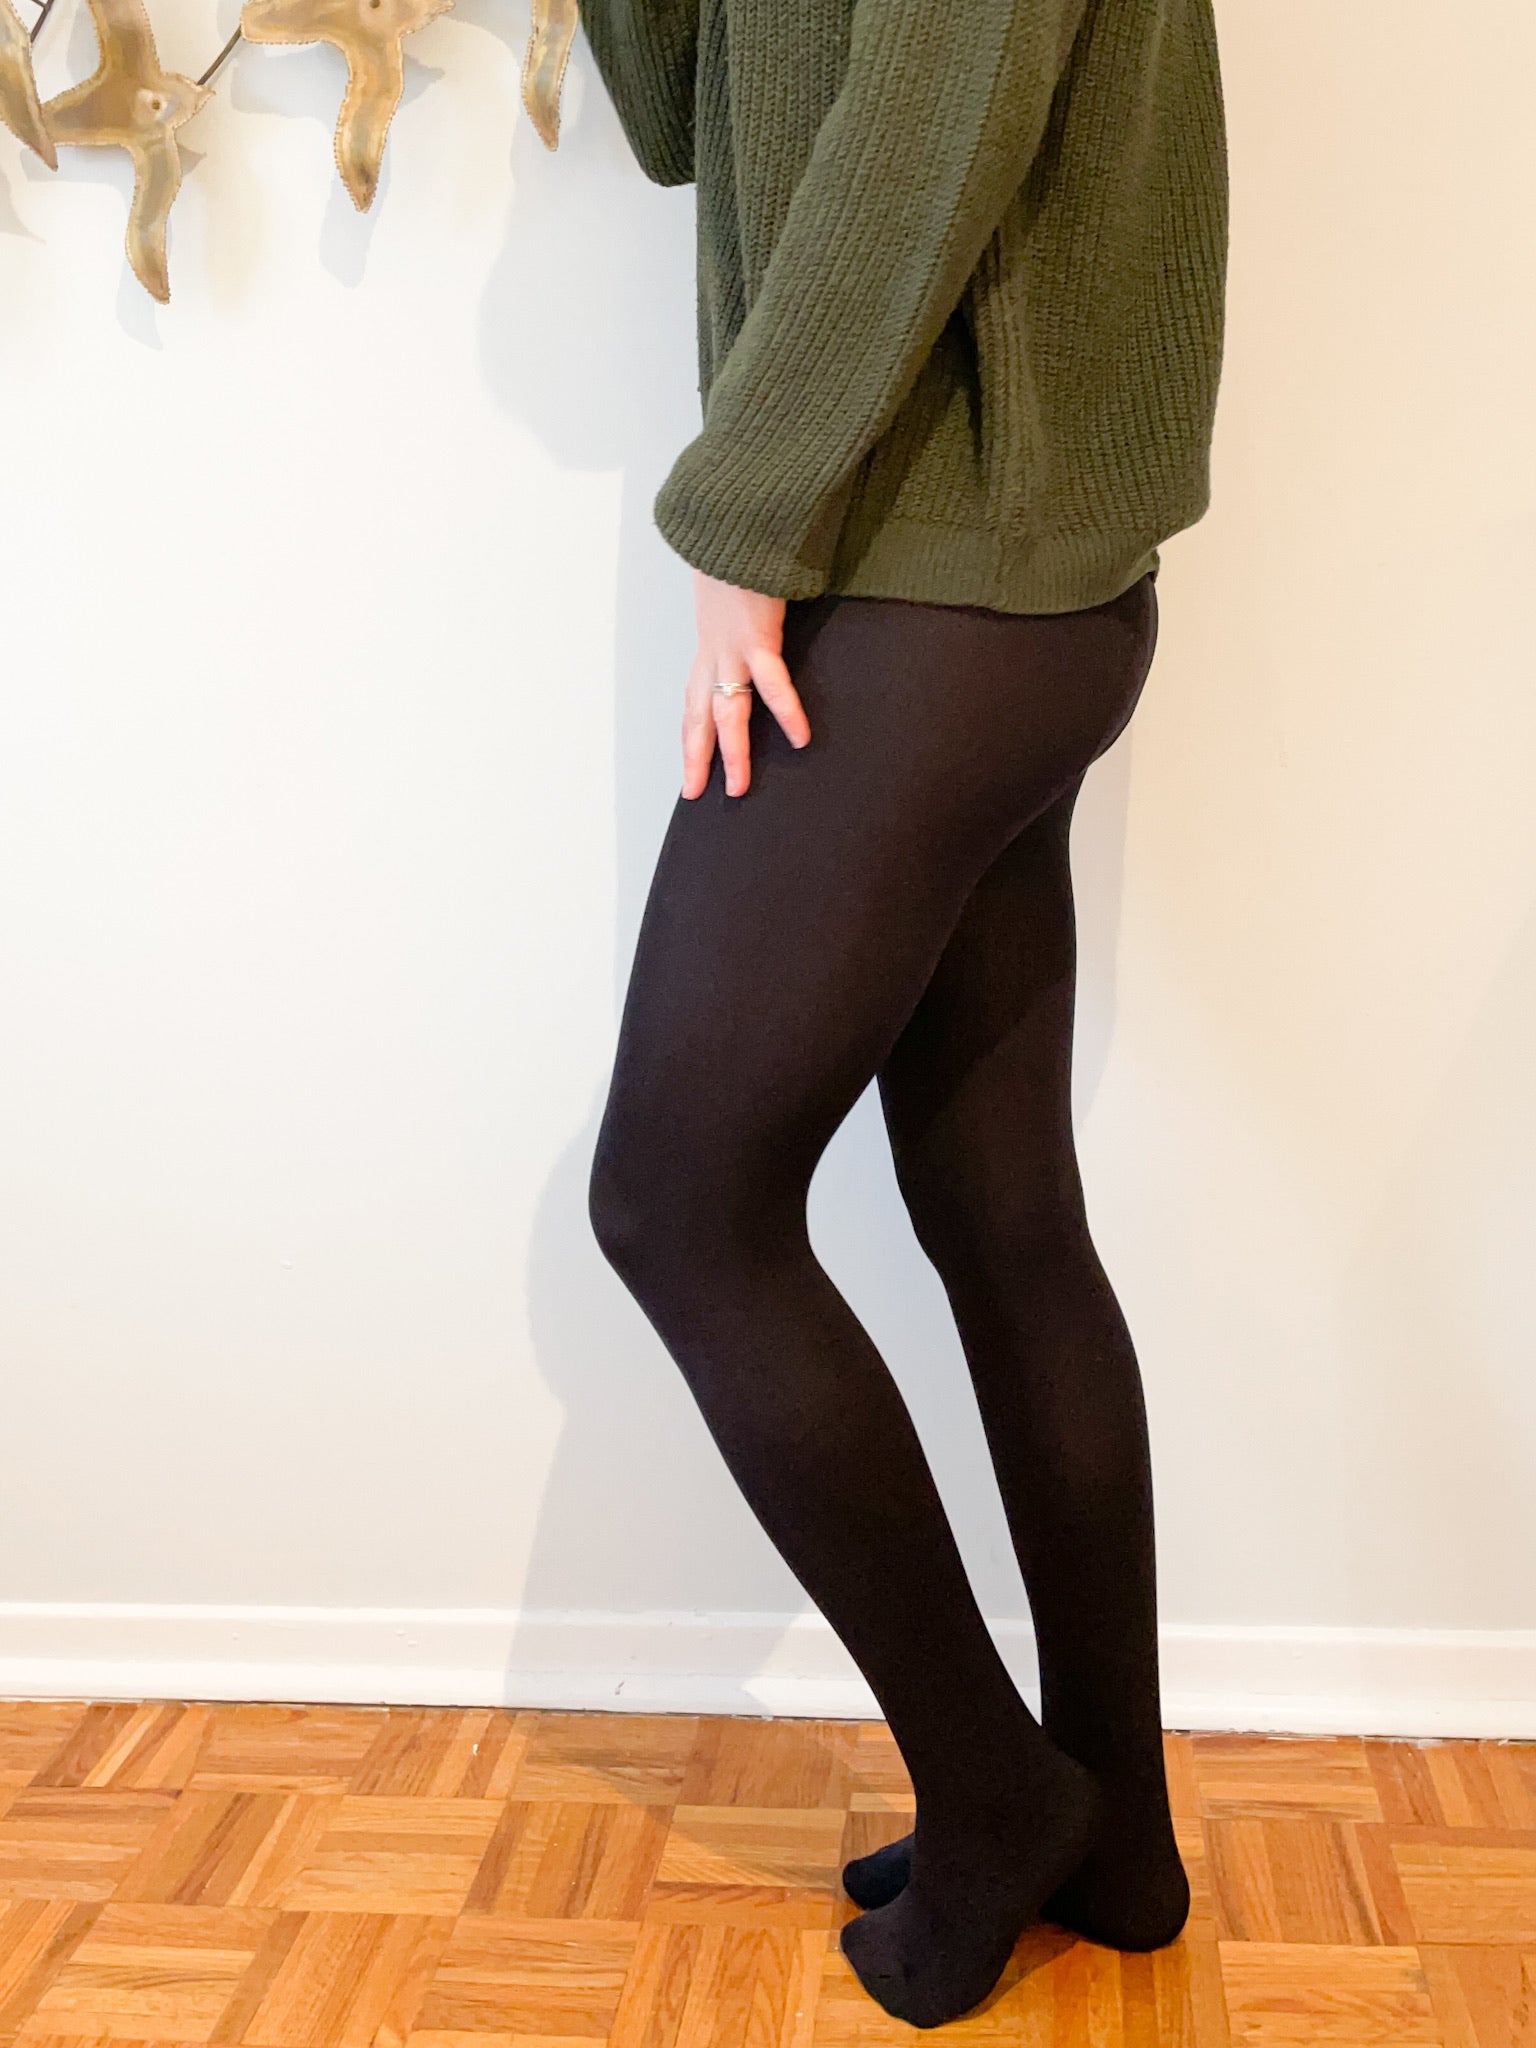 Black Footless Footless Tights for Women Ankle Length Pantyhose Plus Size  Available -  Canada